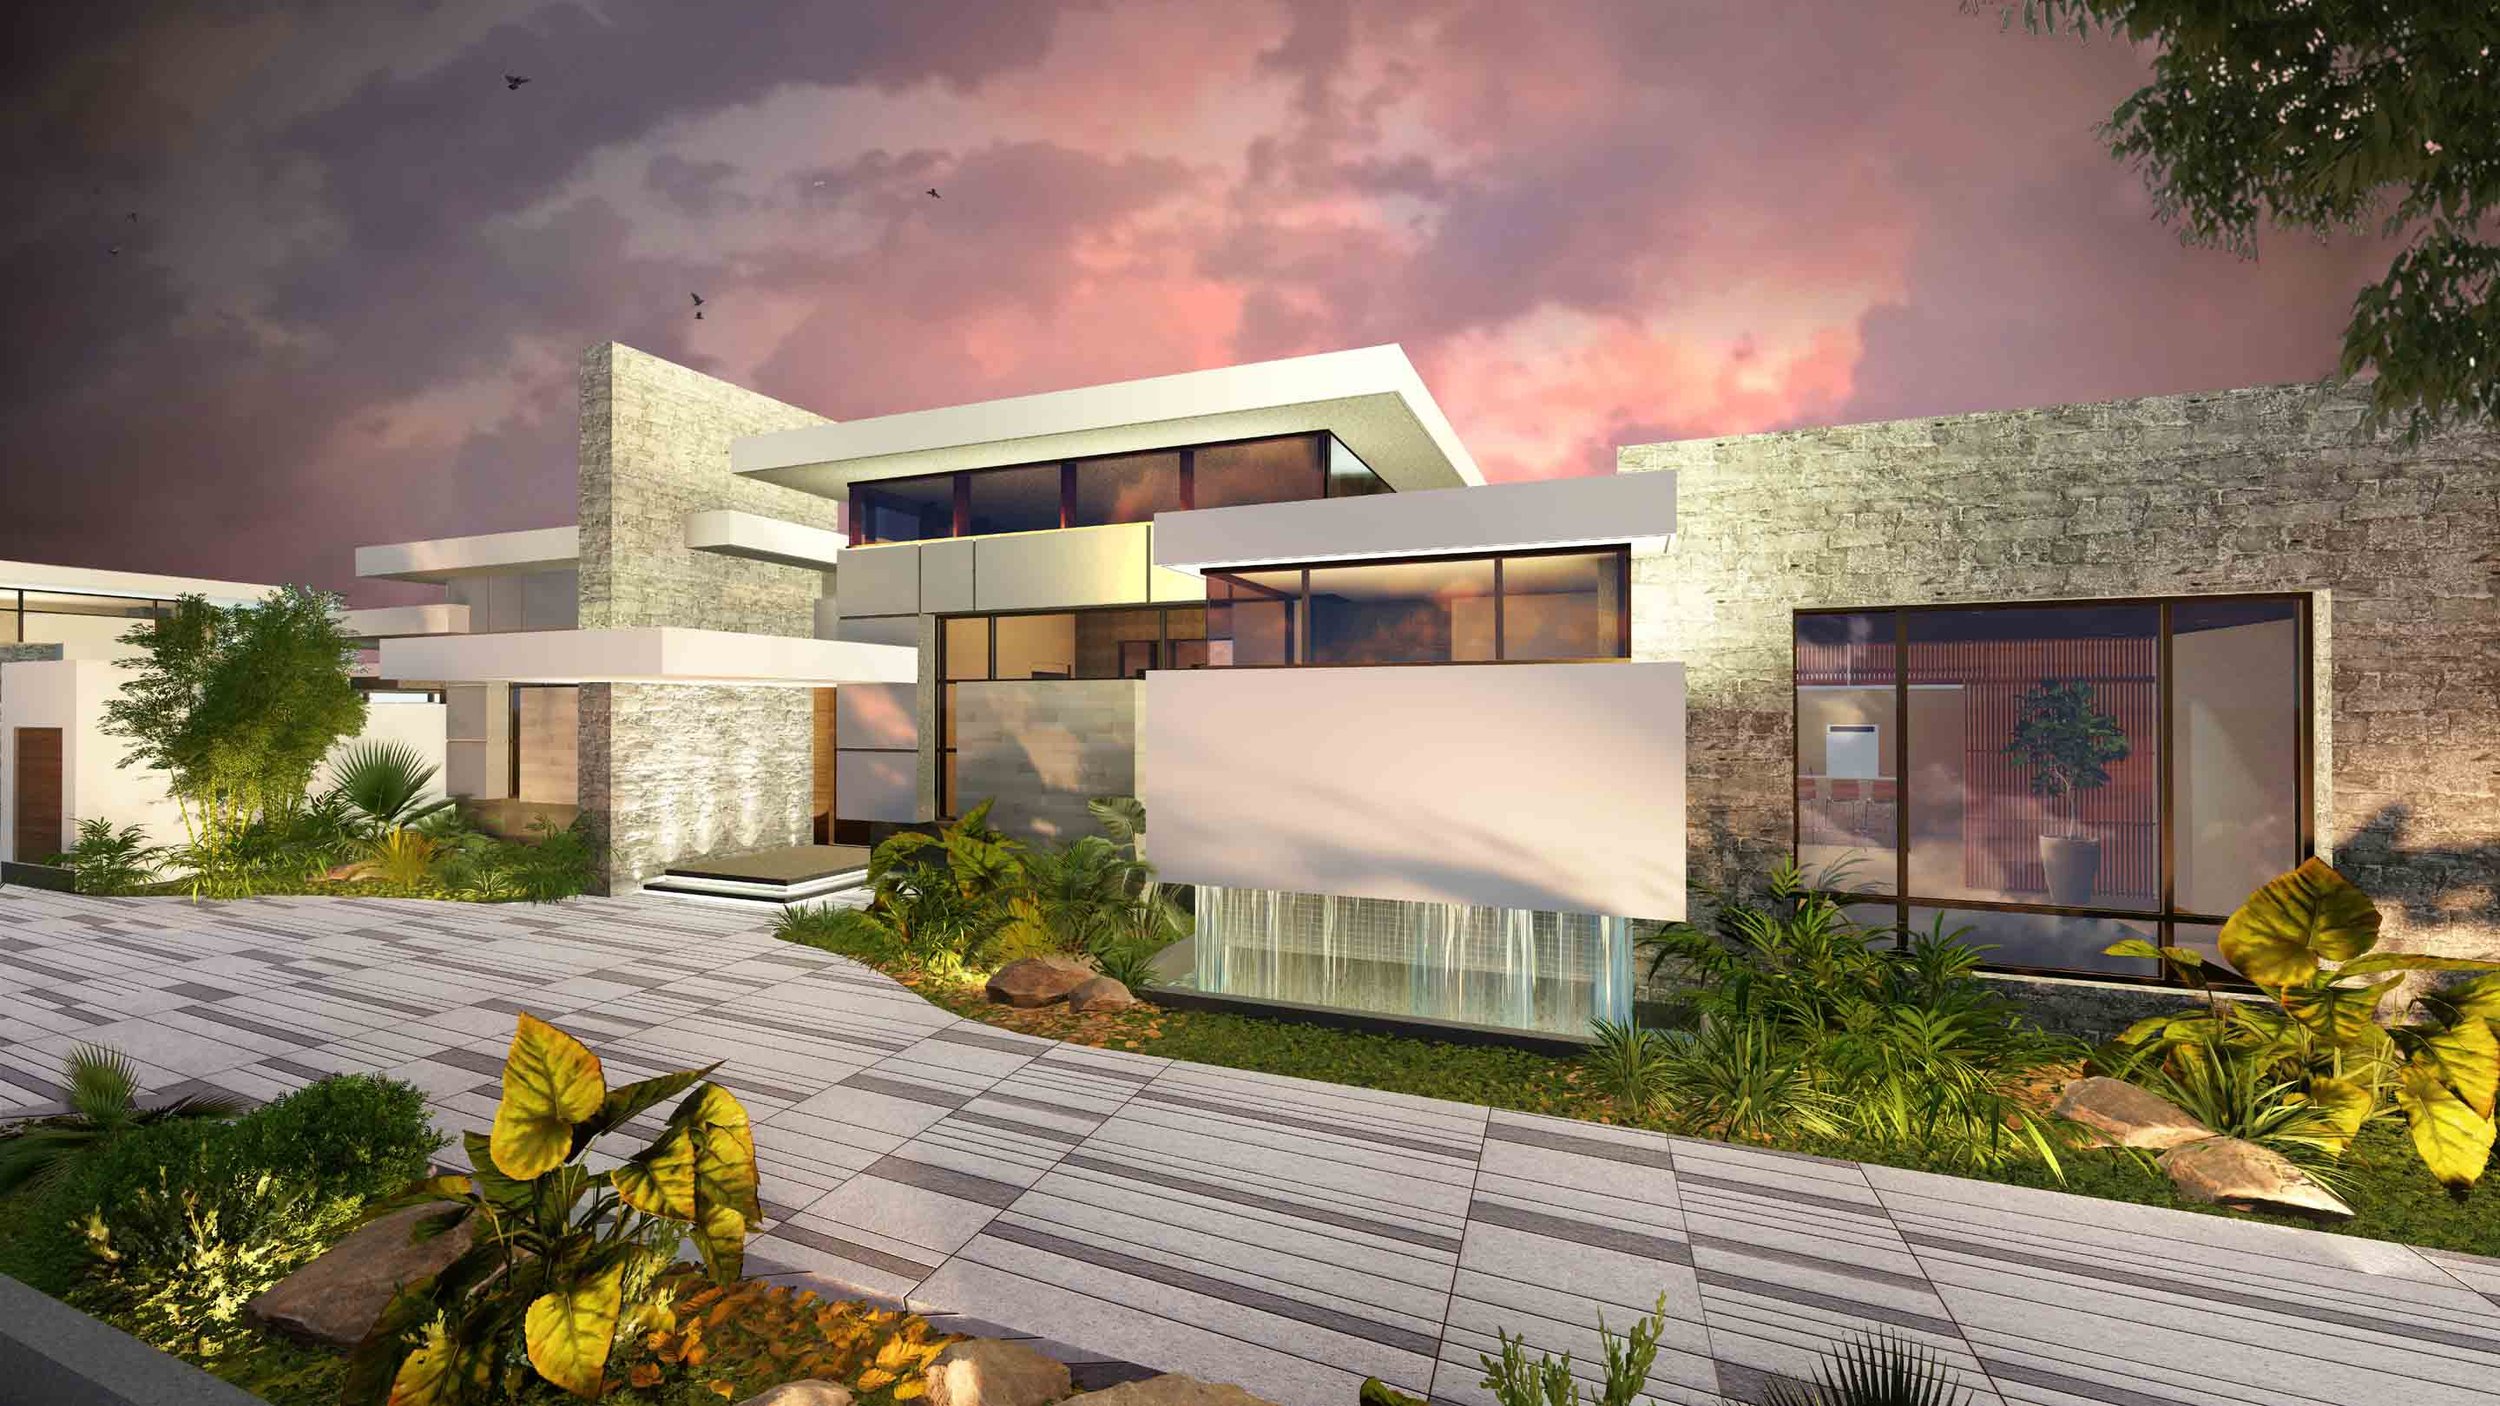  Conceptual render of the Condado Residence project. 